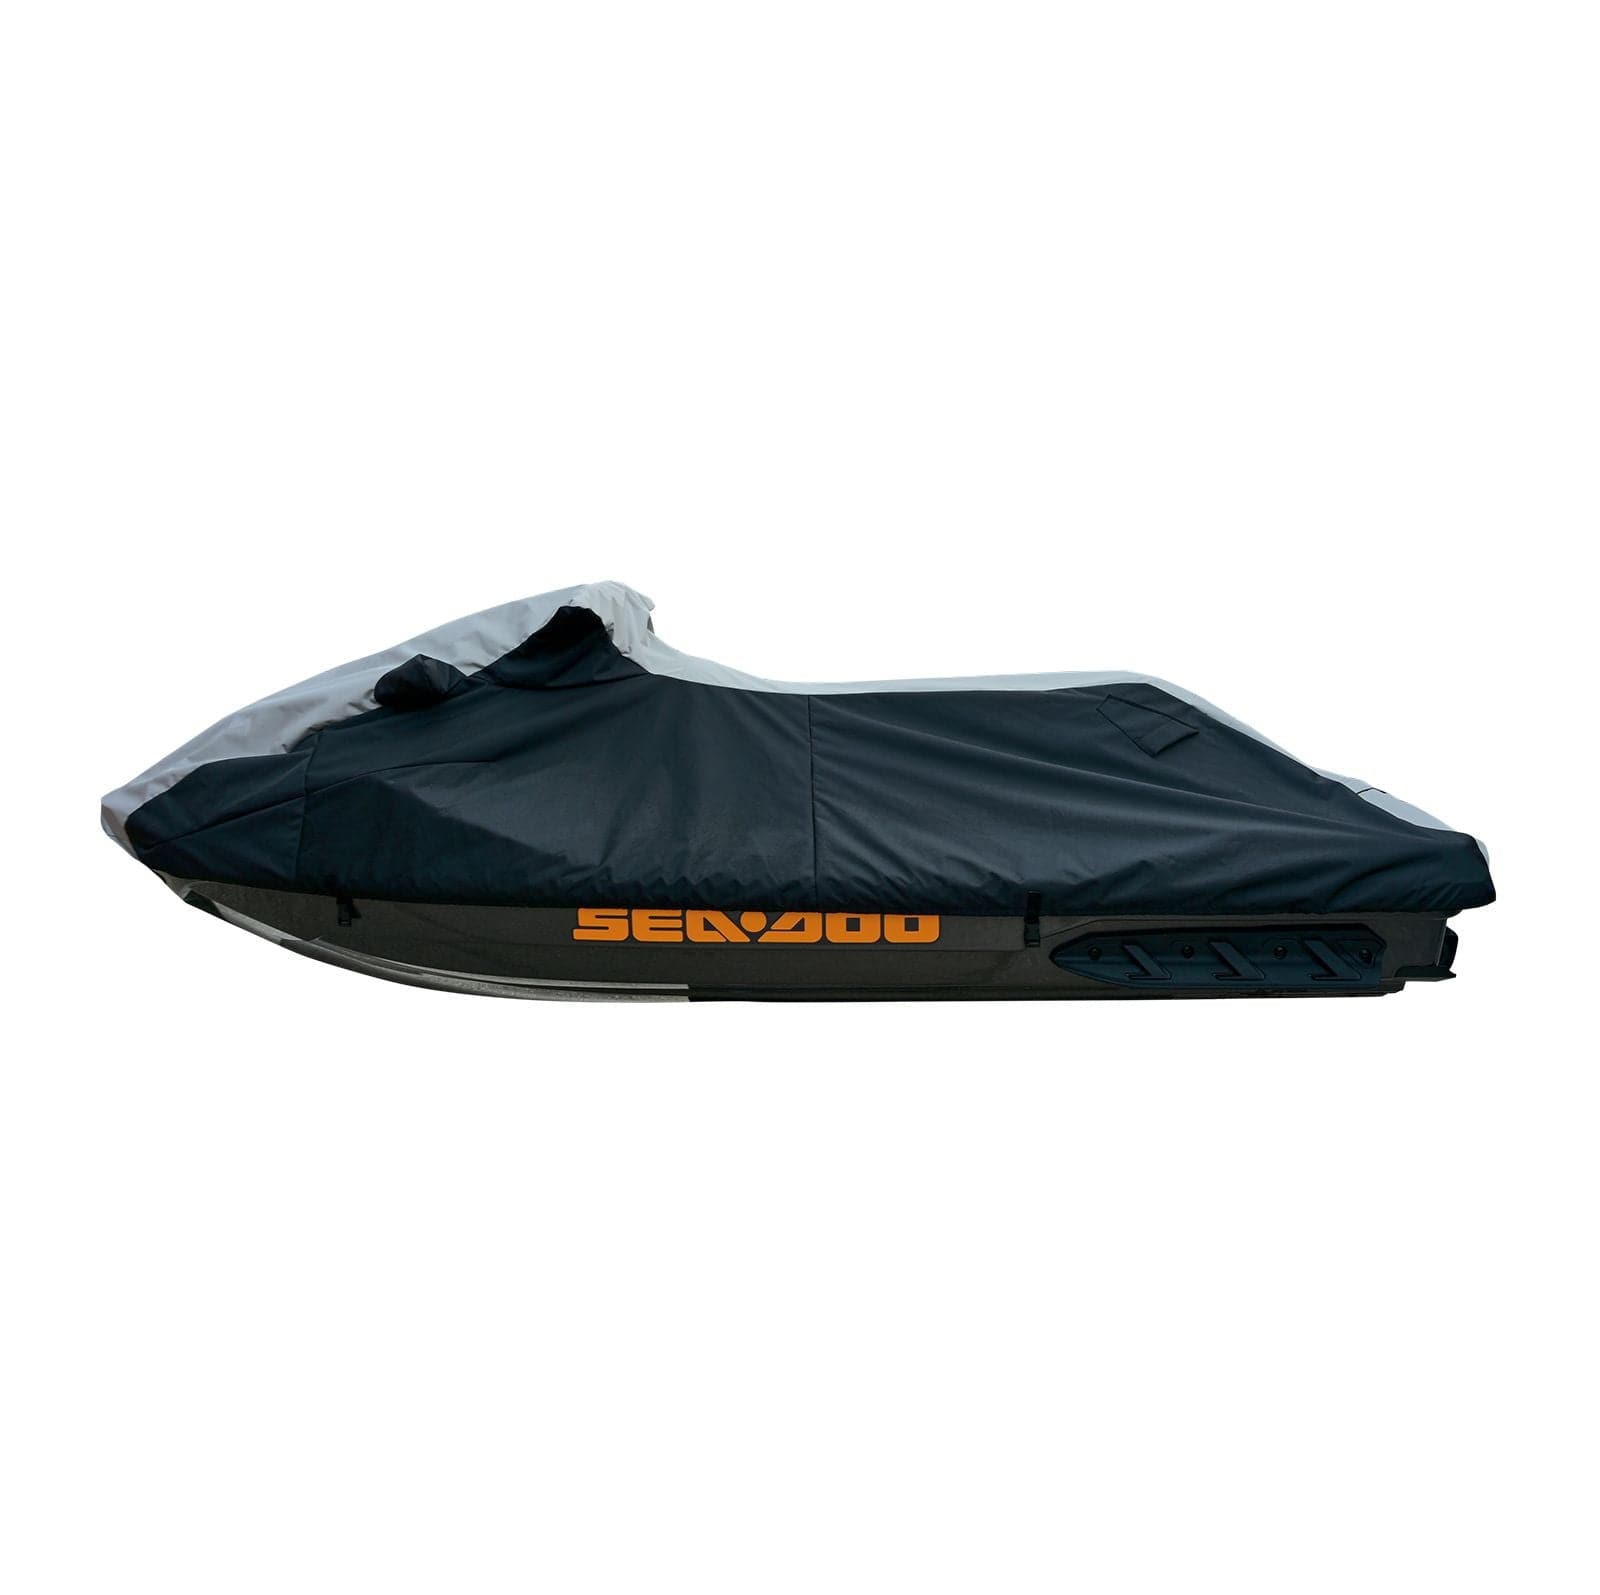 Trailerable Storage cover with vents for Yamaha 1990-1997 Wave Runner III